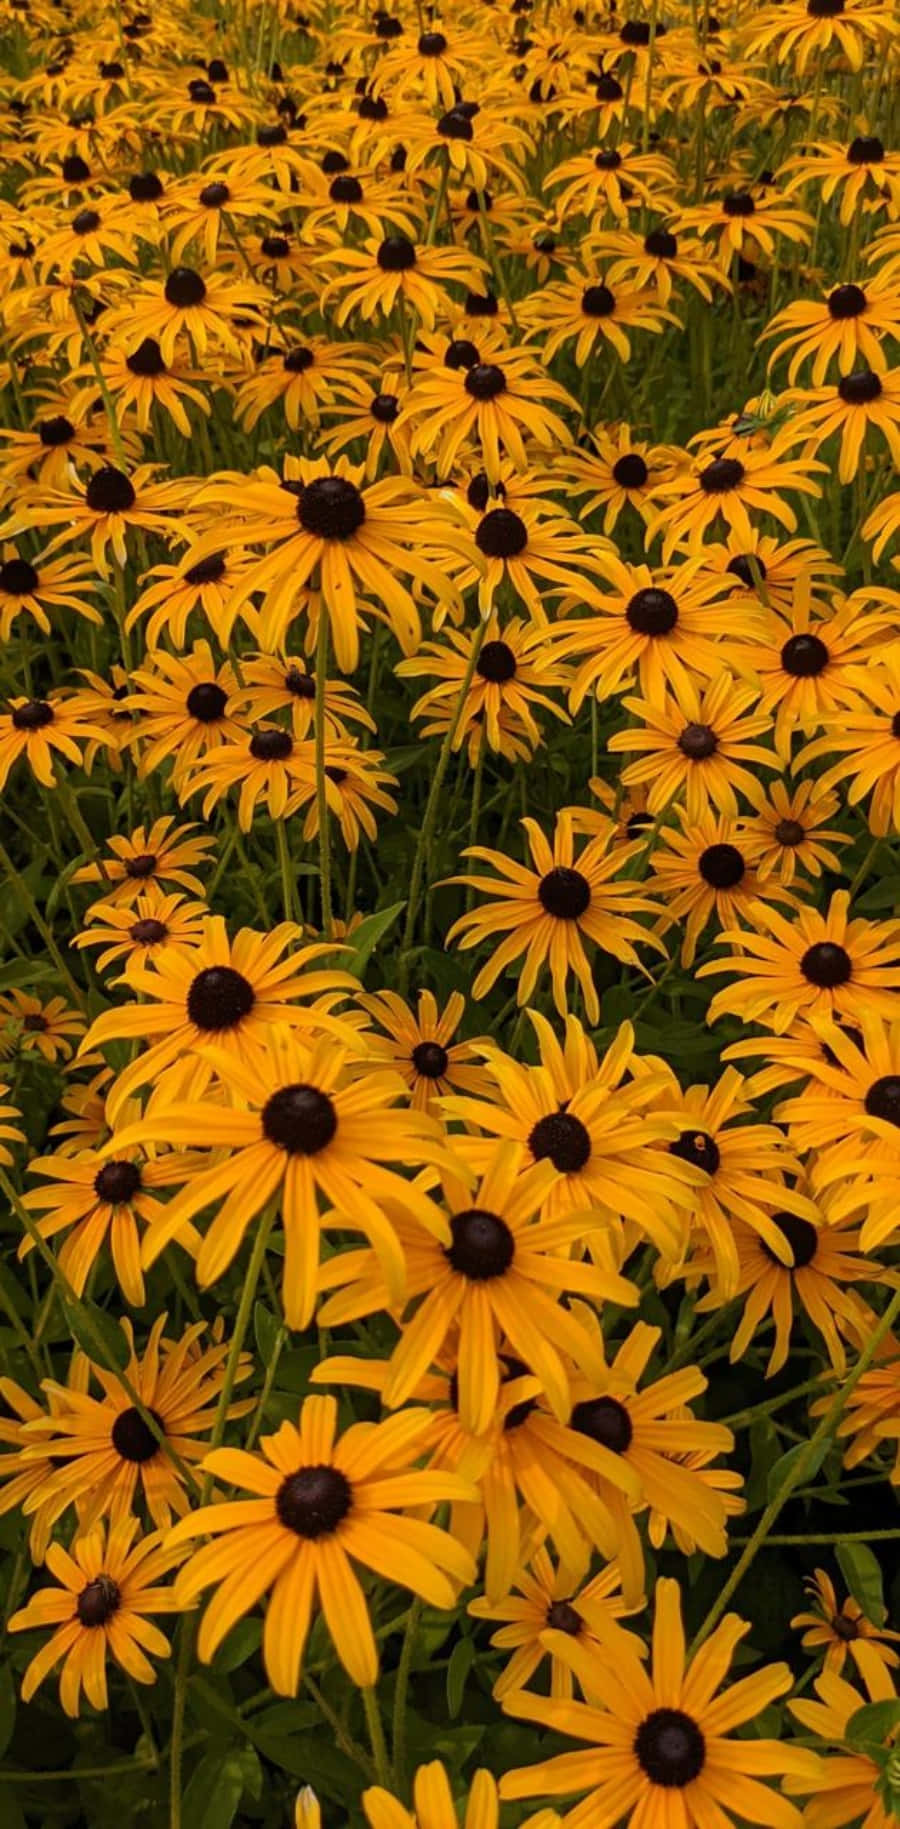 The Showy Beauty of a Black Eyed Susan Wallpaper